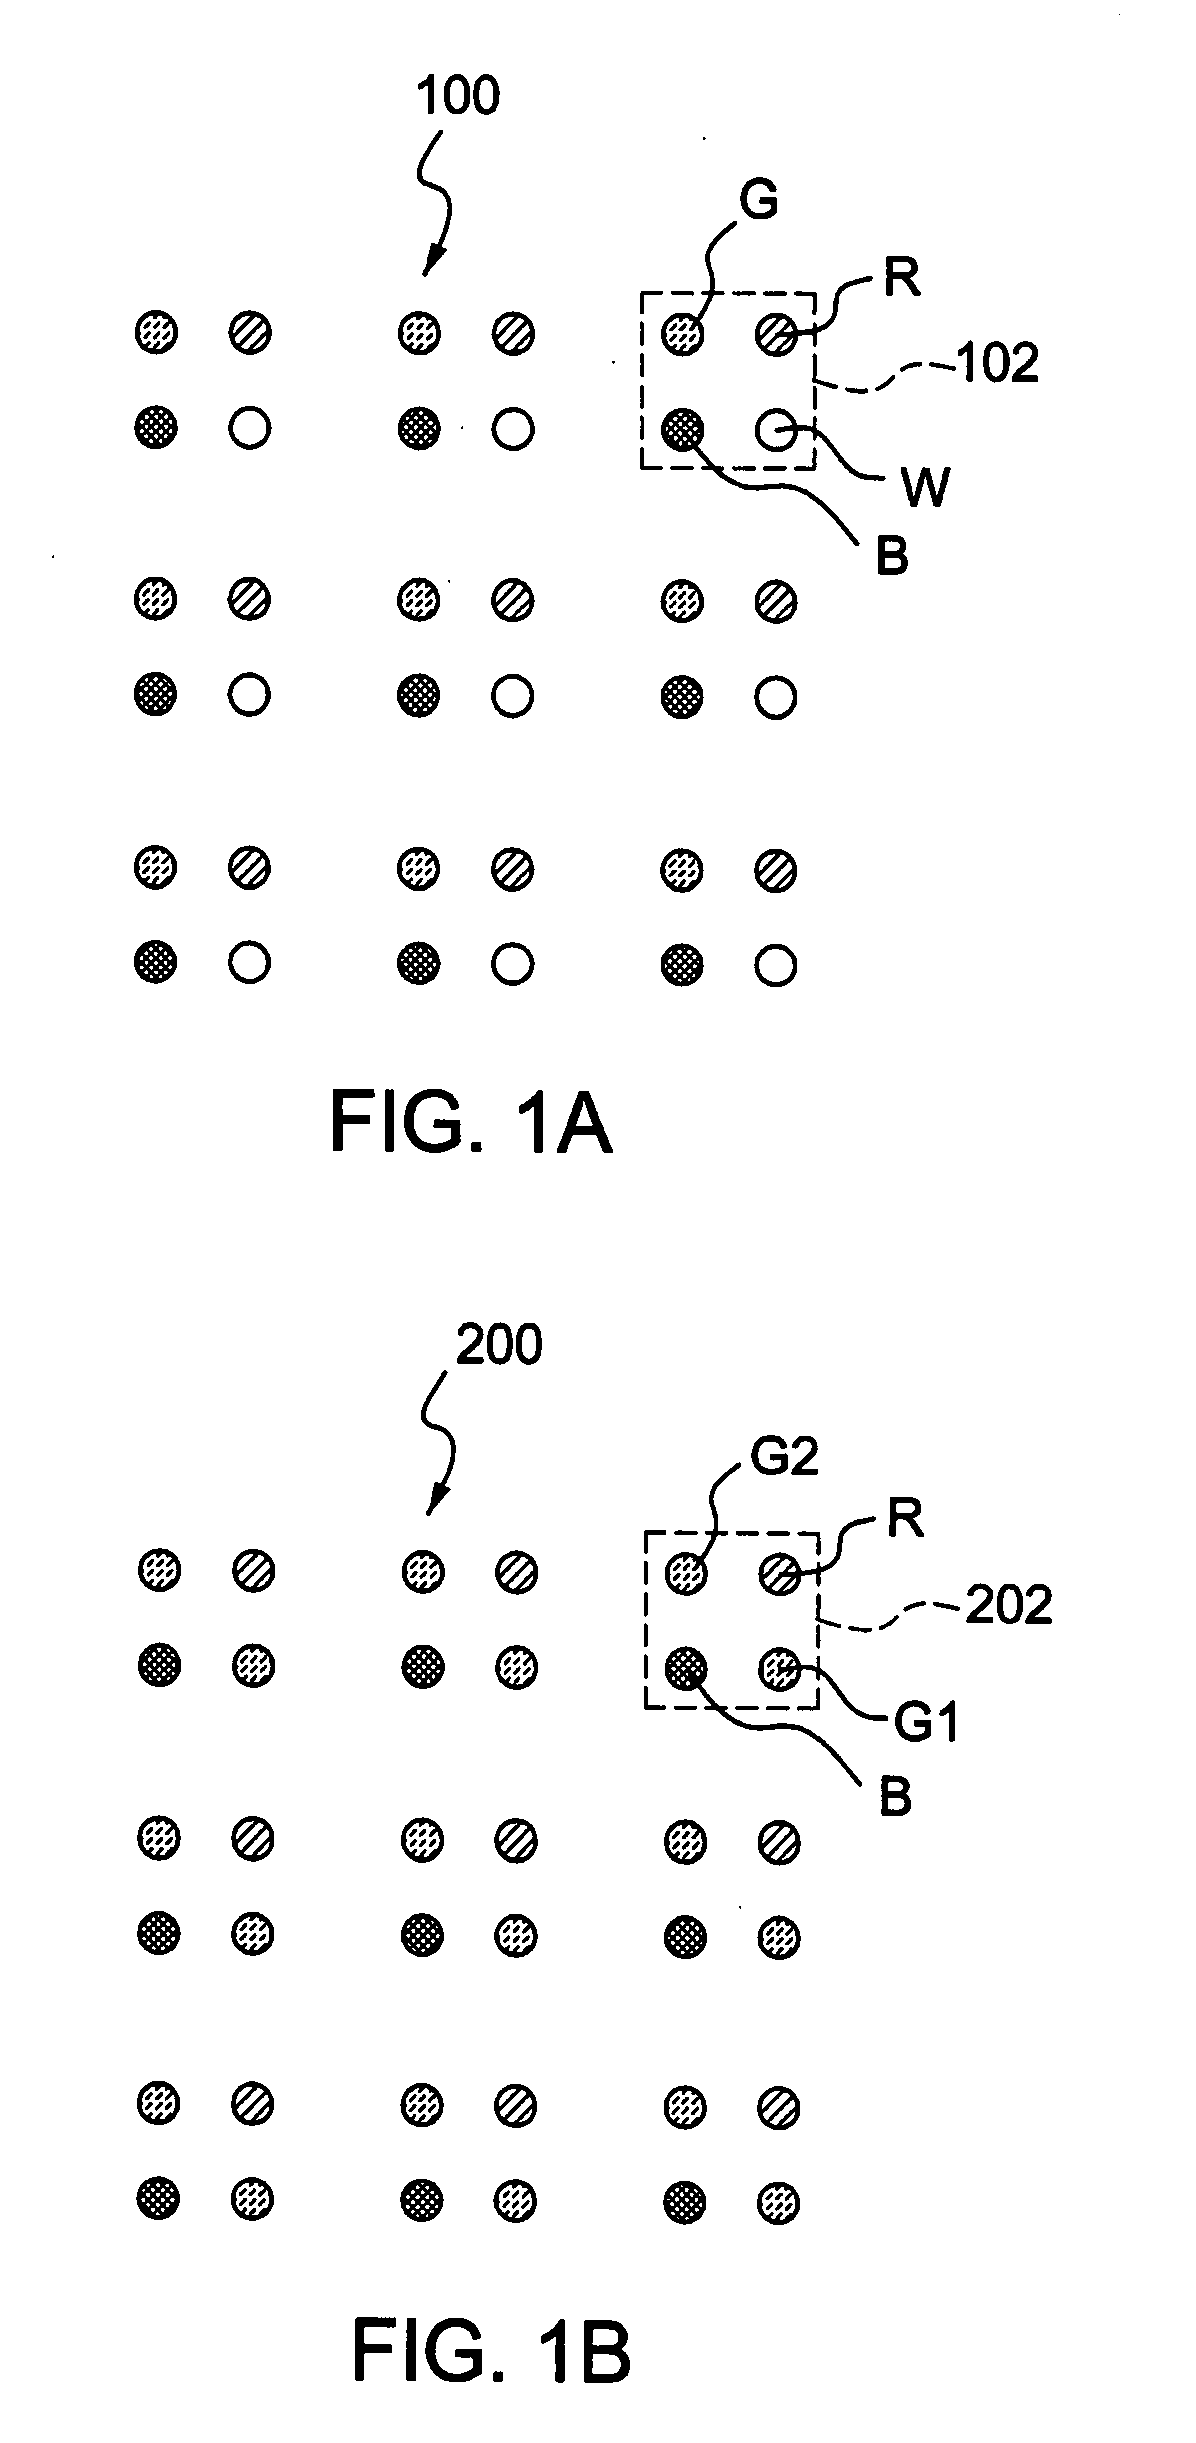 Backlight assembly, method of driving the same and display system having the same thereof